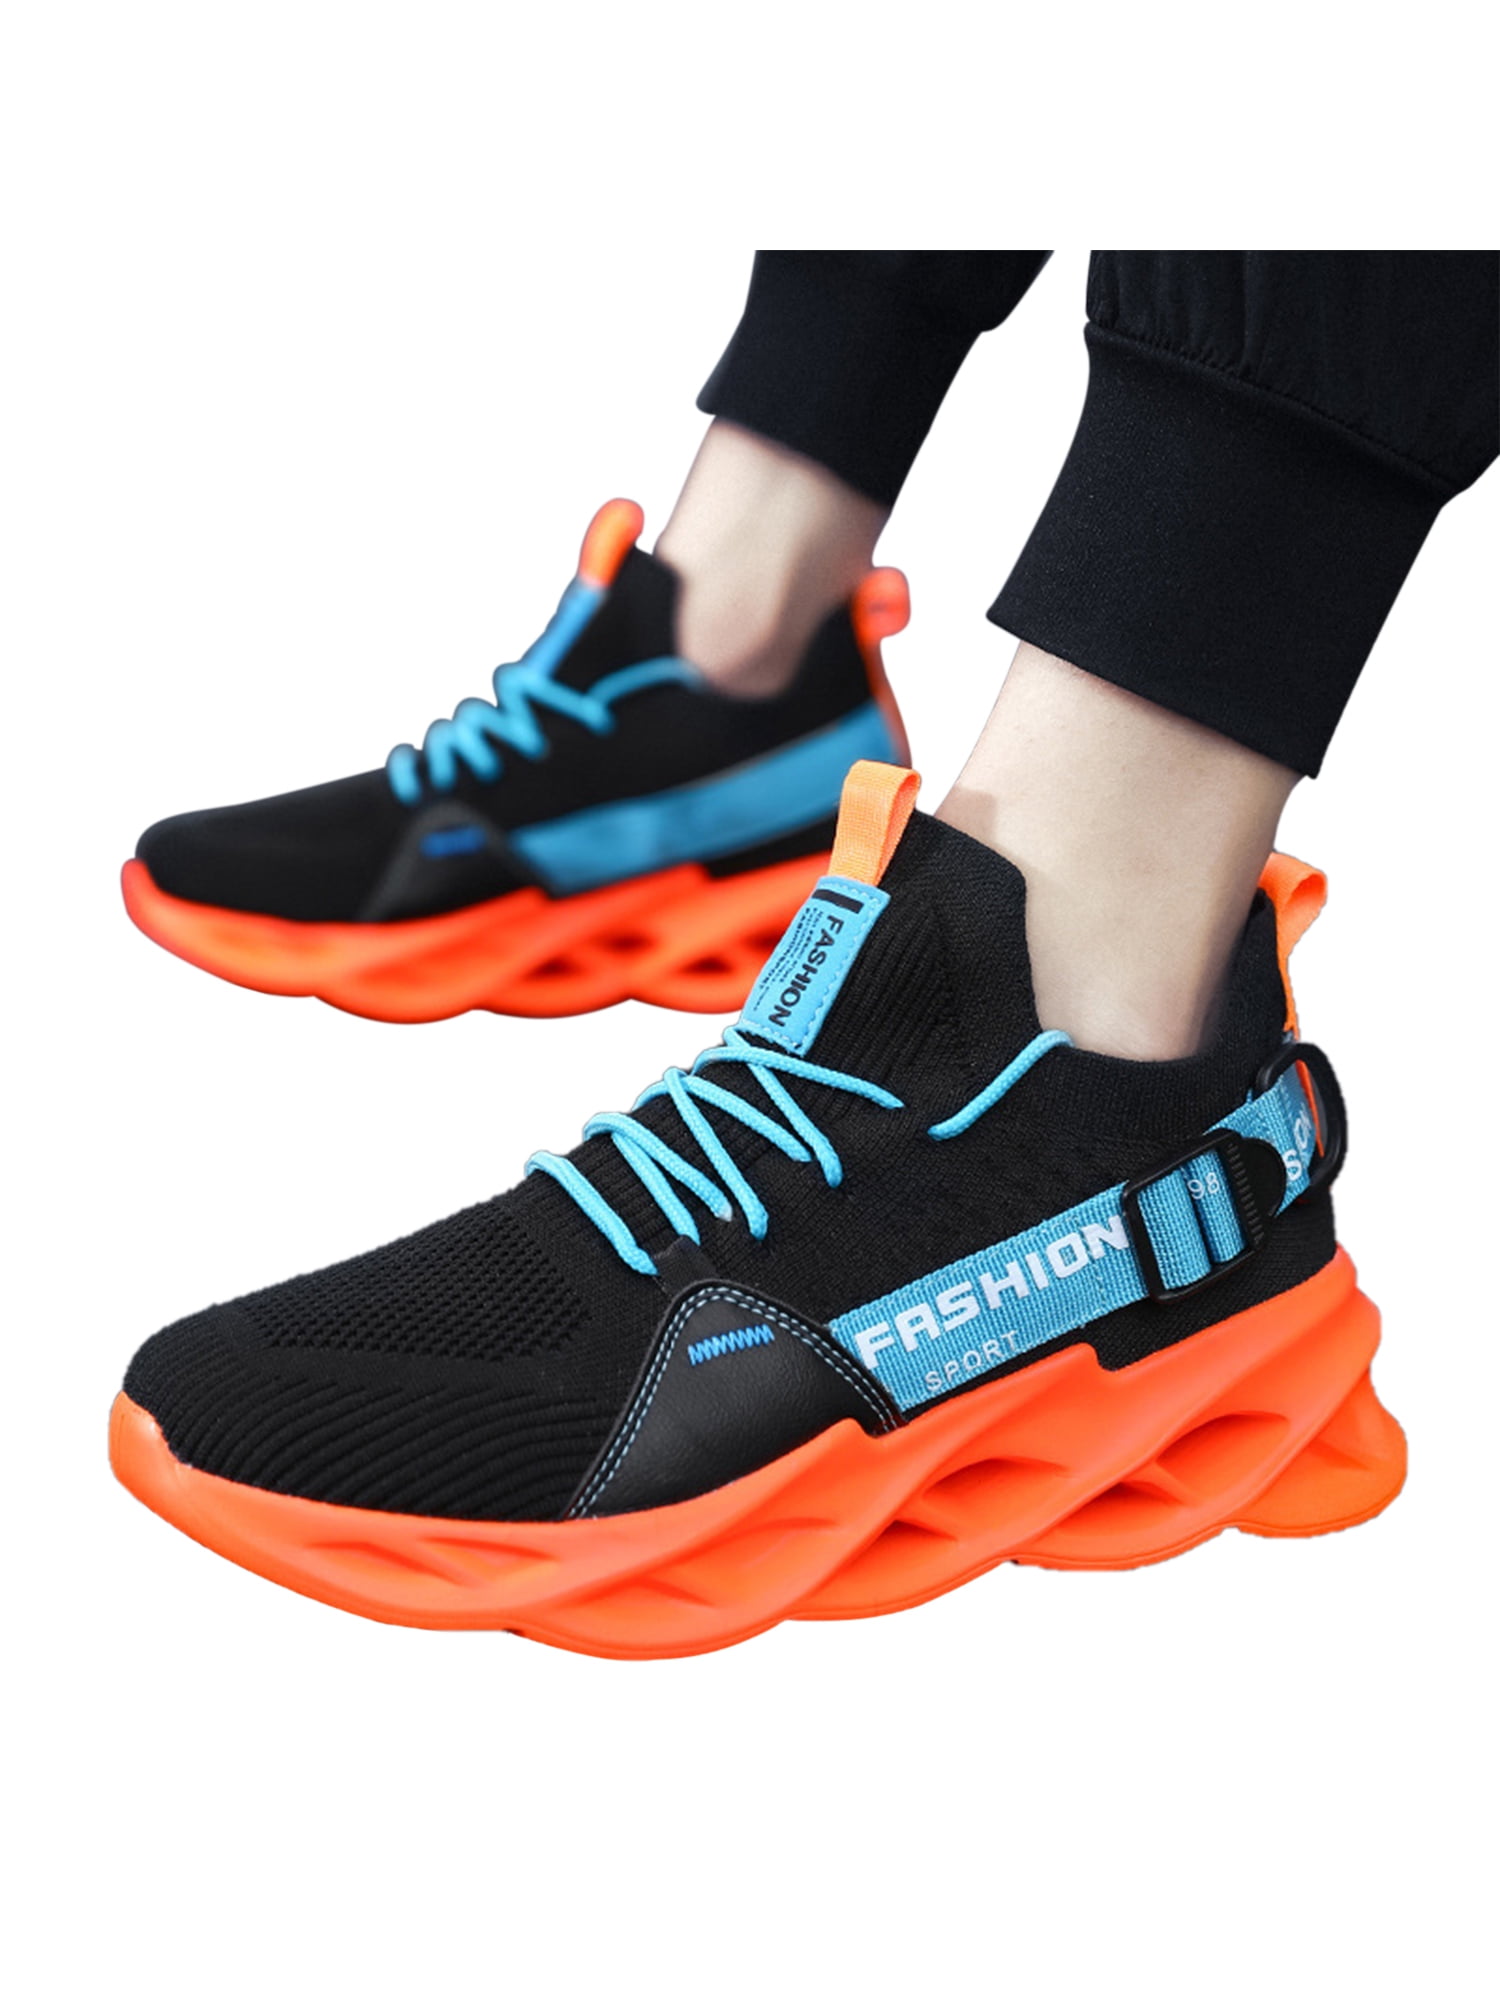 Mens Womens Running Trainers Sneakers Slip On Jogging Gym Athletic Fitness Shoes 